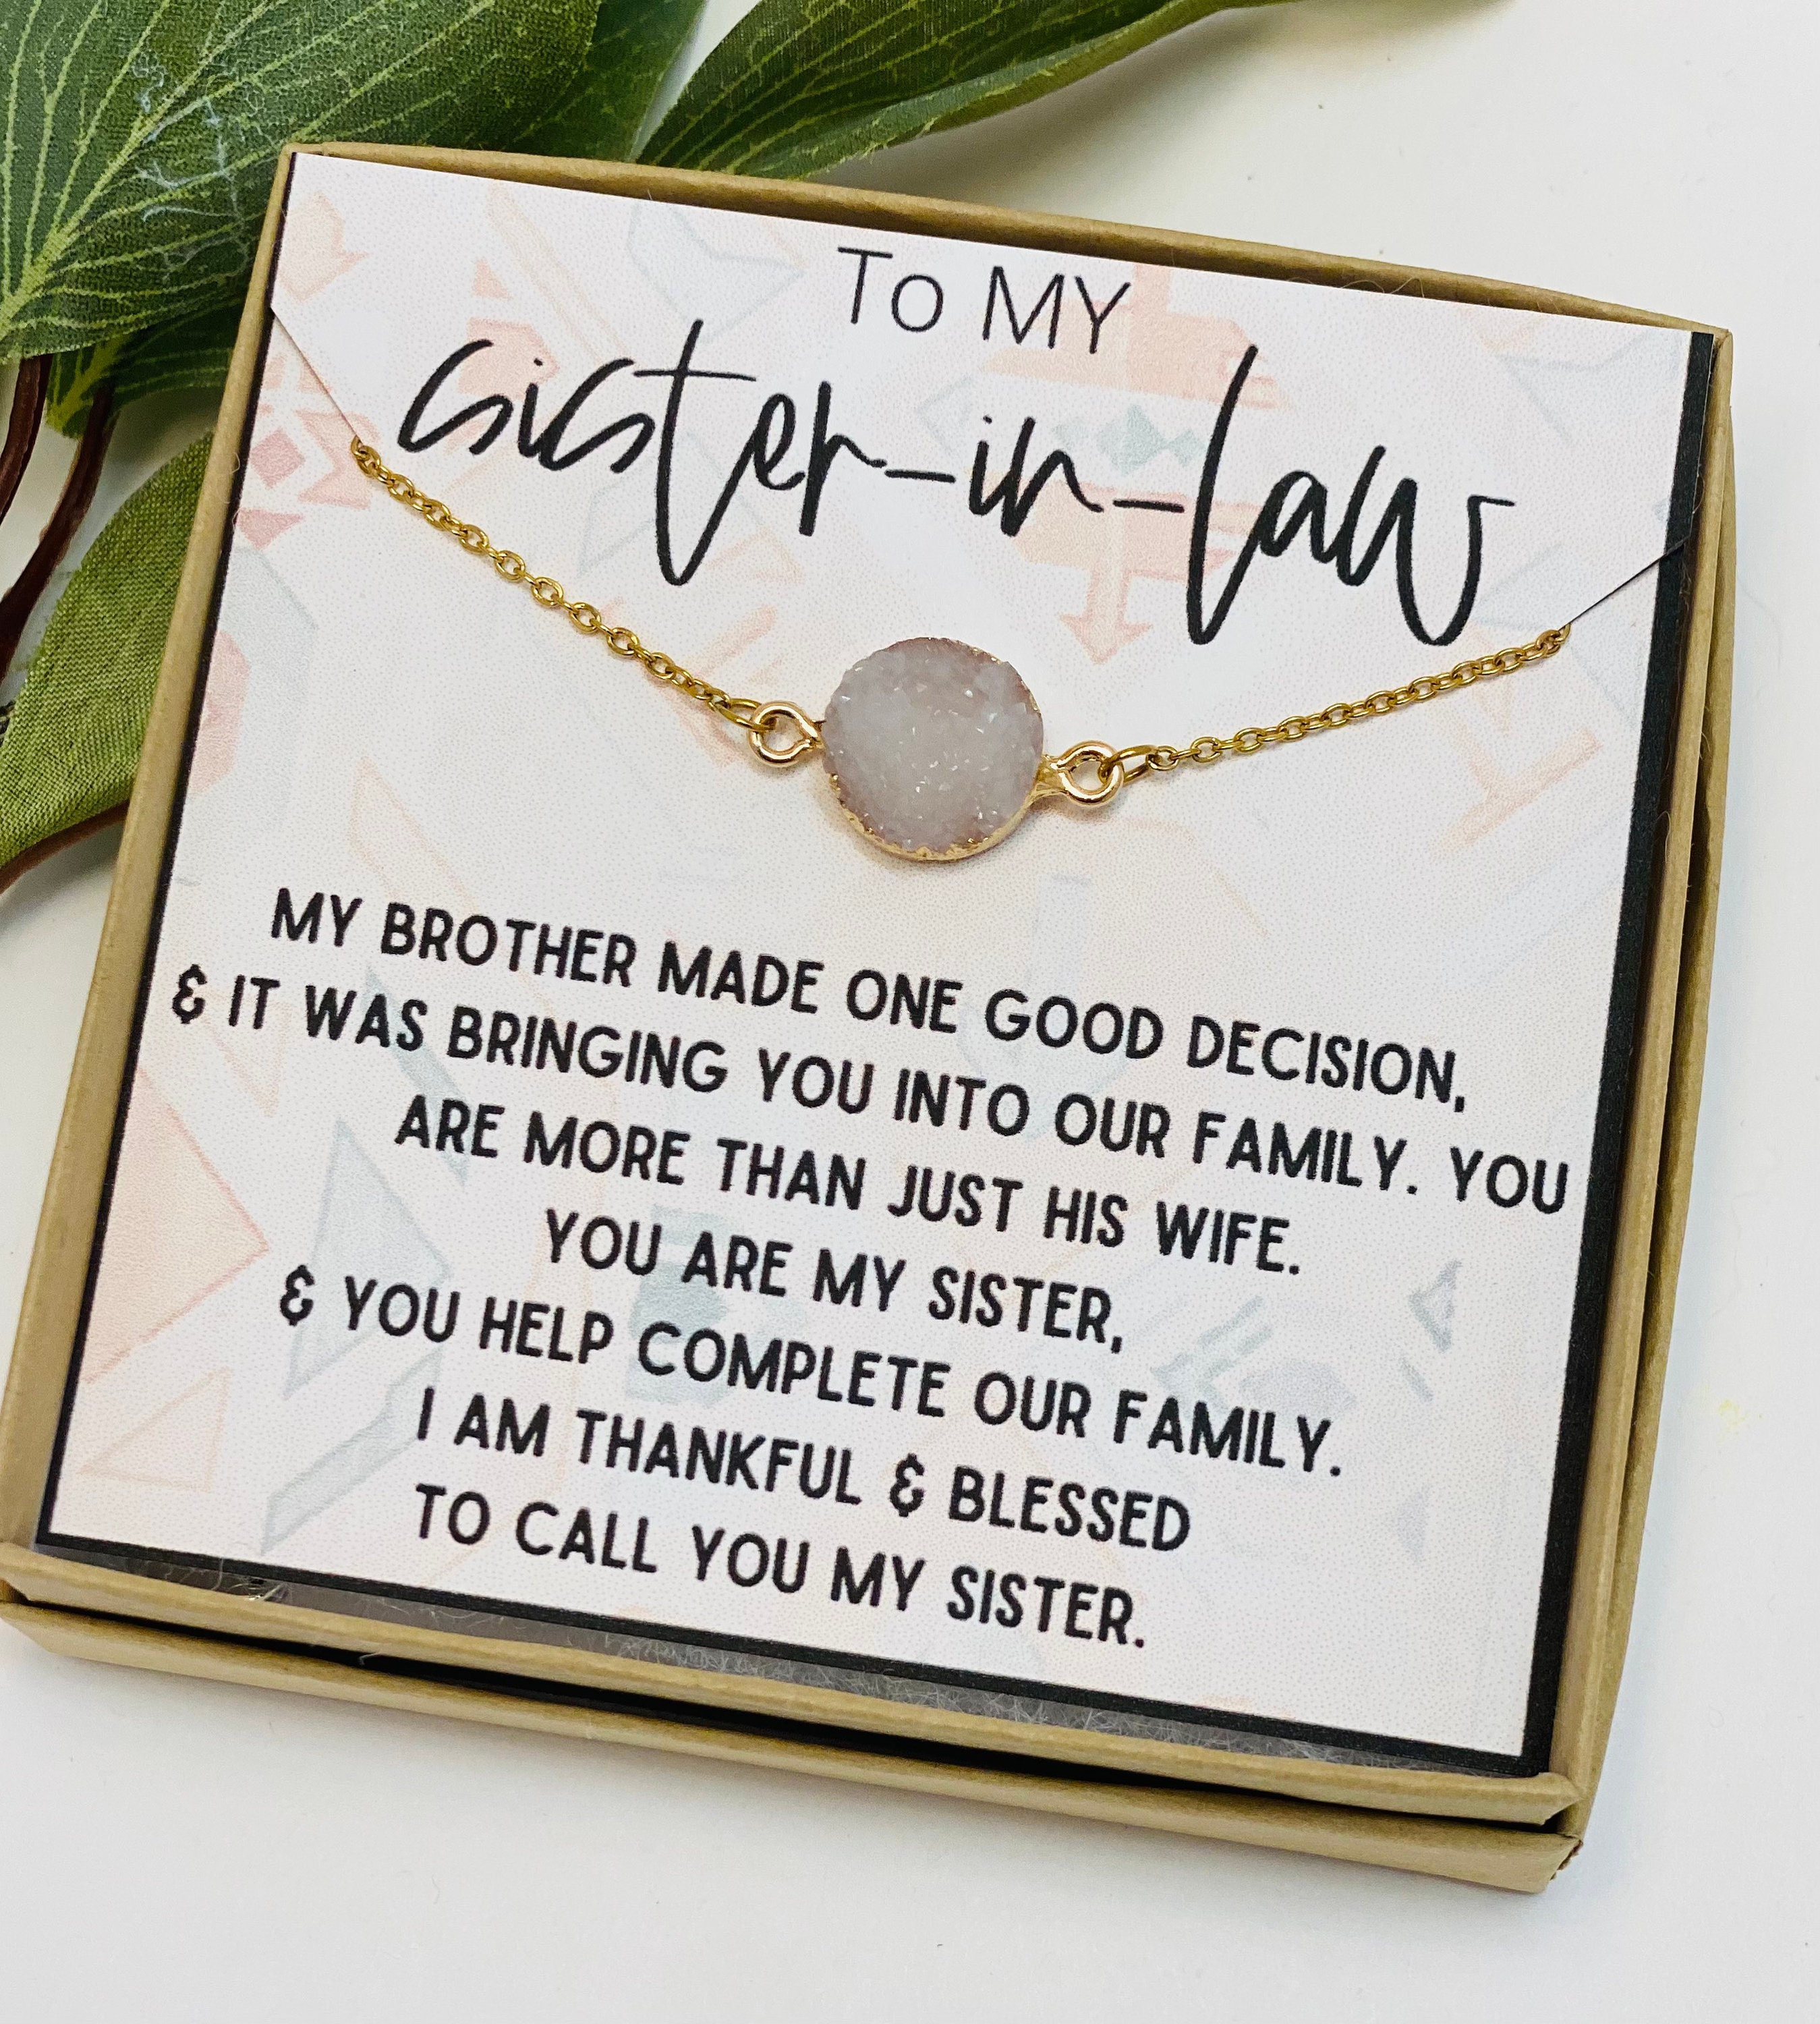 The 29 Best Gifts for Sisters-in-Law